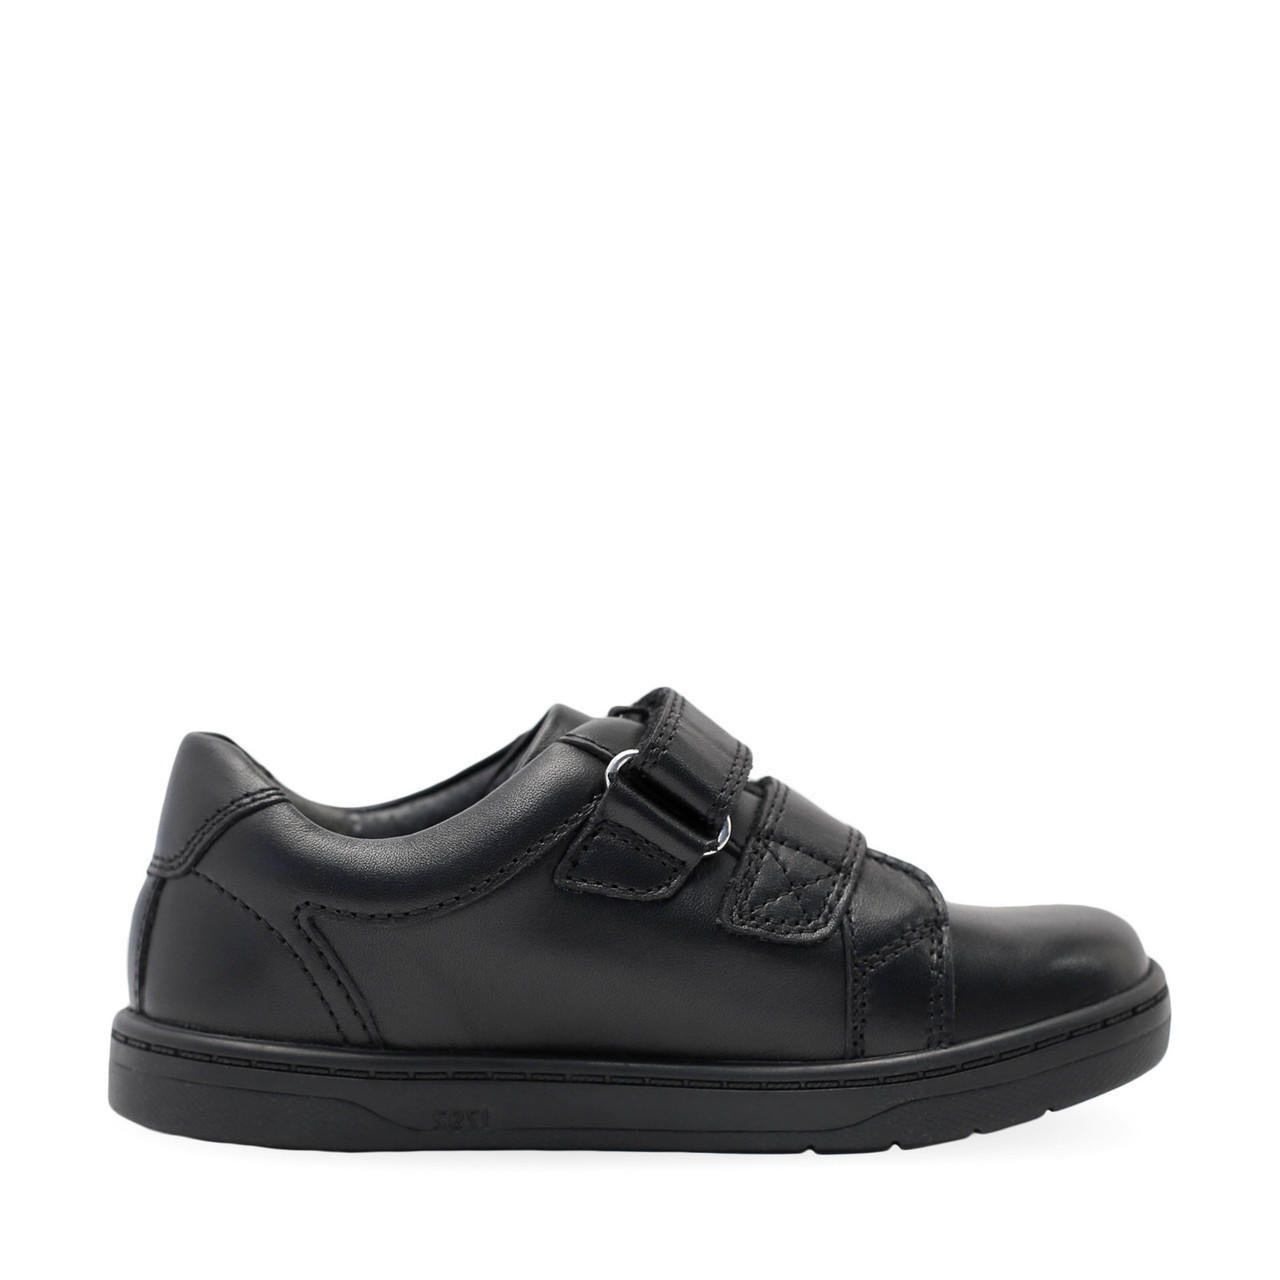 Explore, Black leather boys rip-tape first school shoes